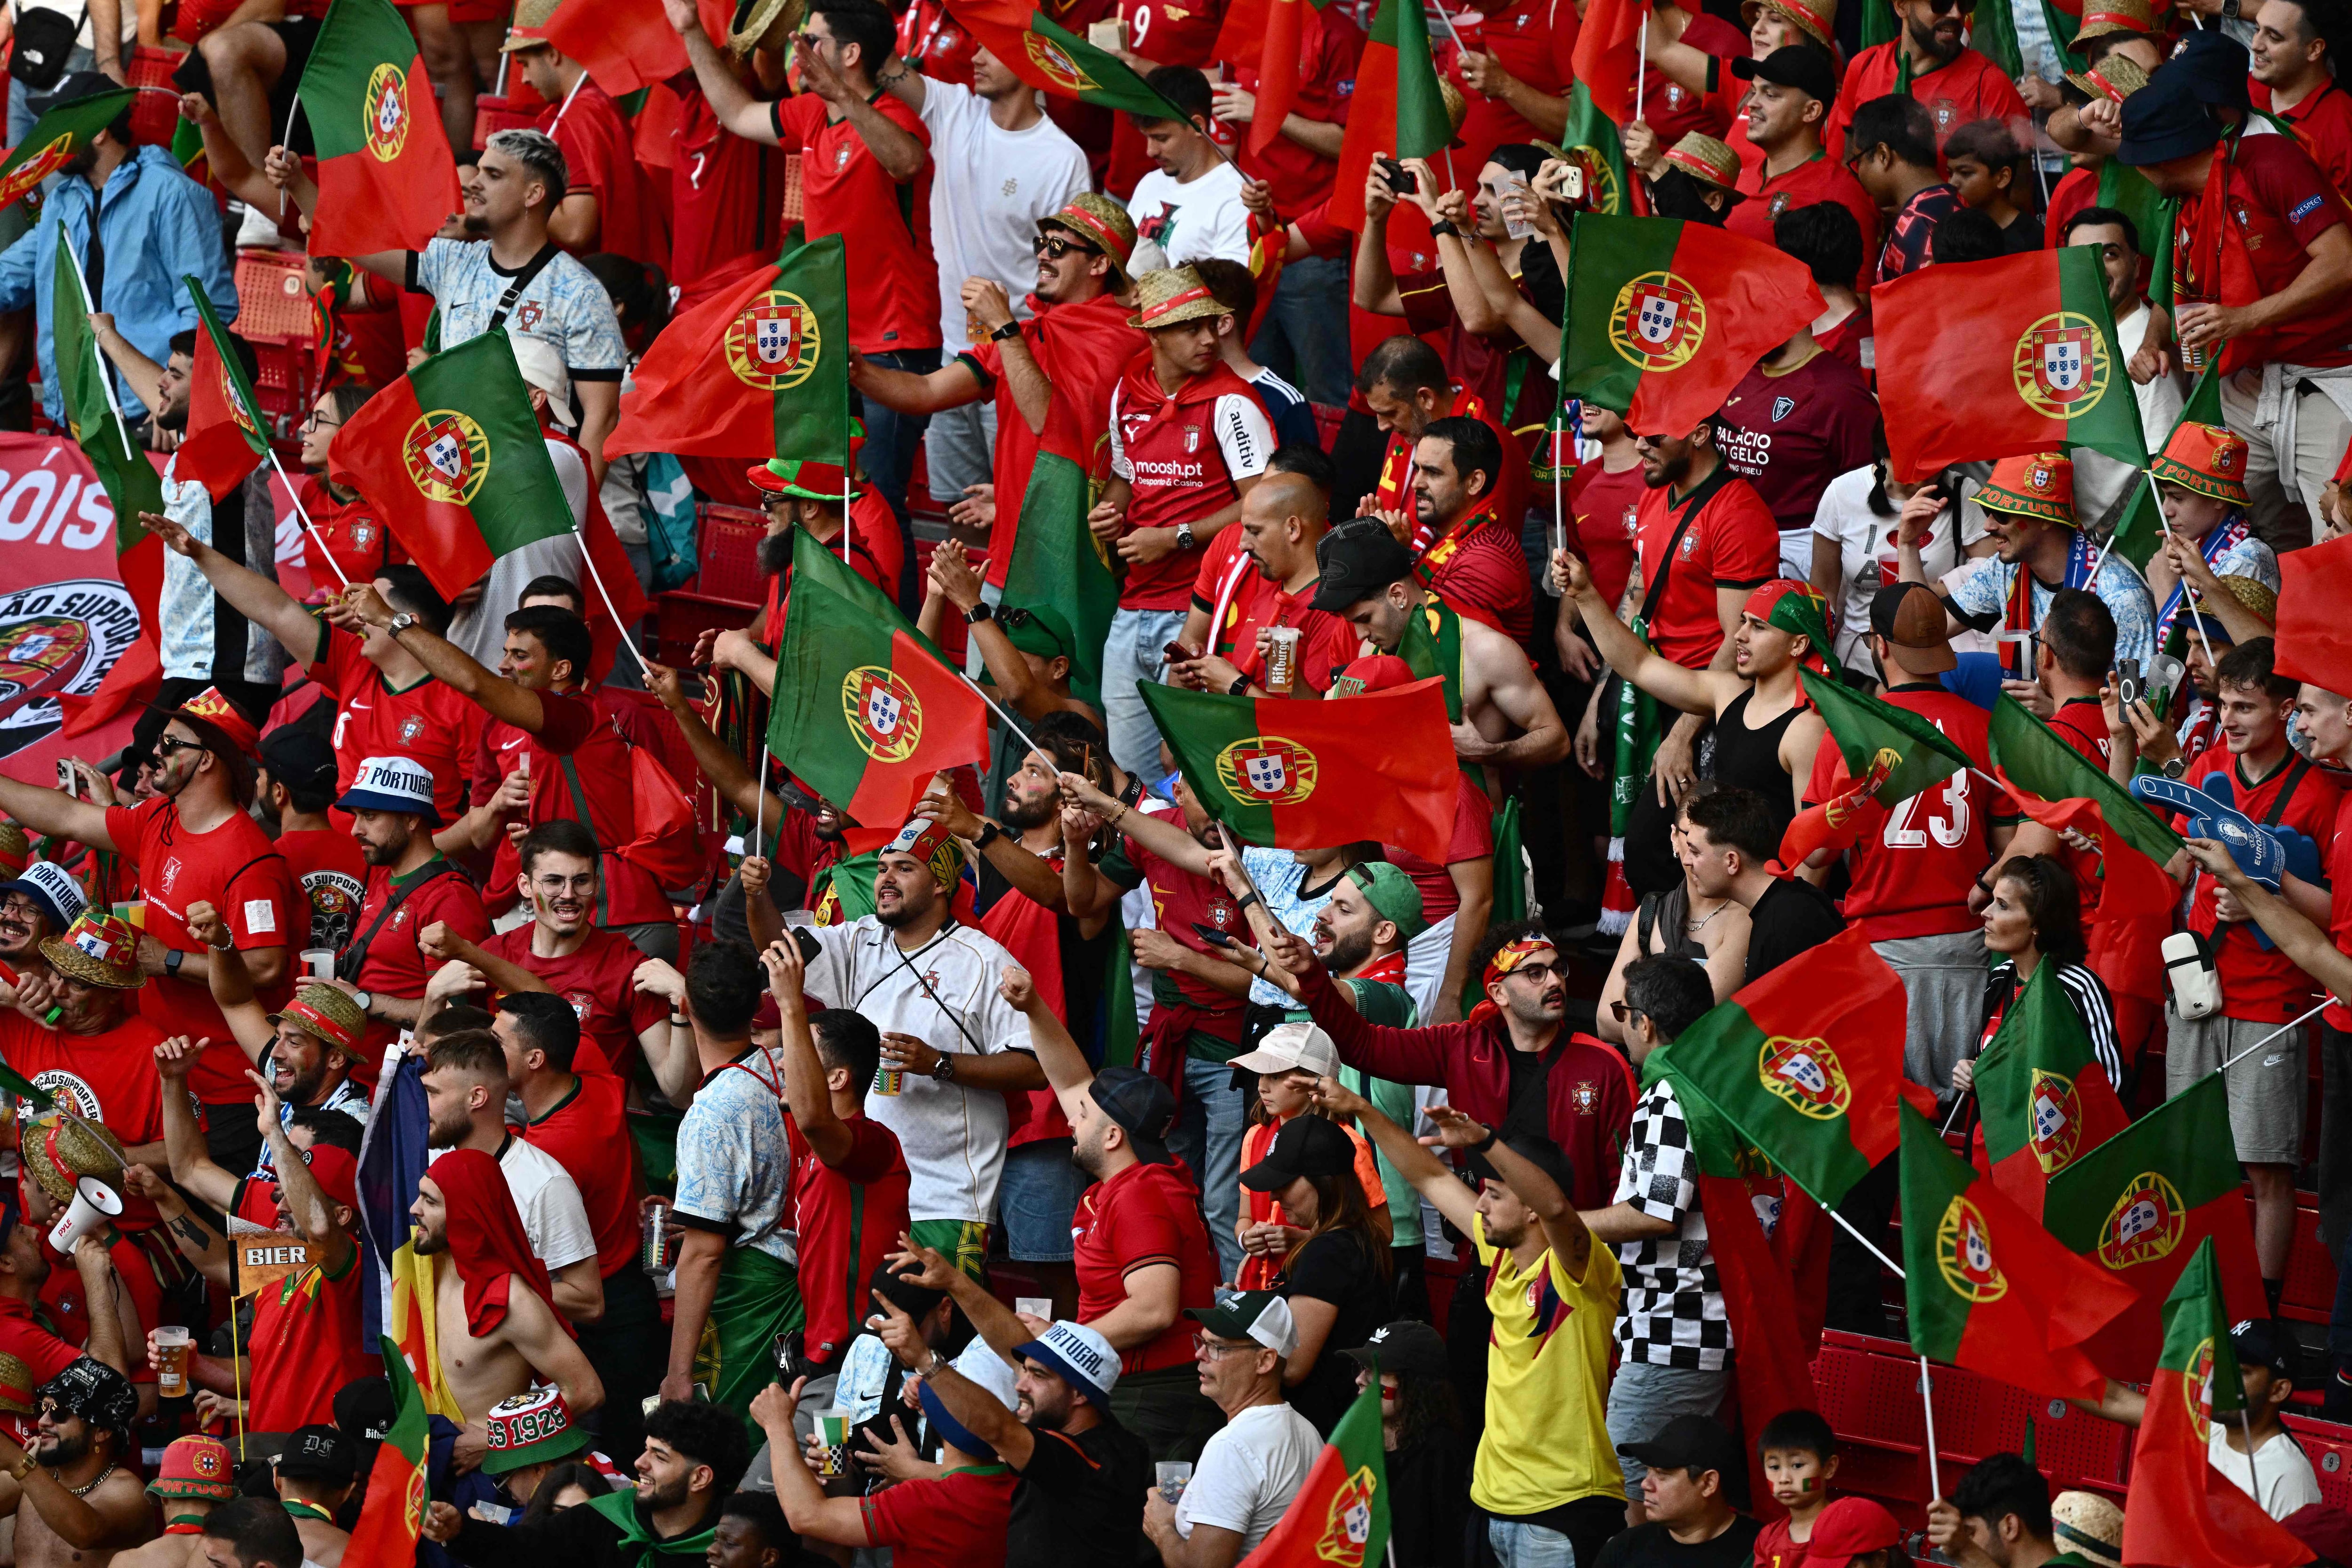 Supporters of Portugal wave flags in the tribune